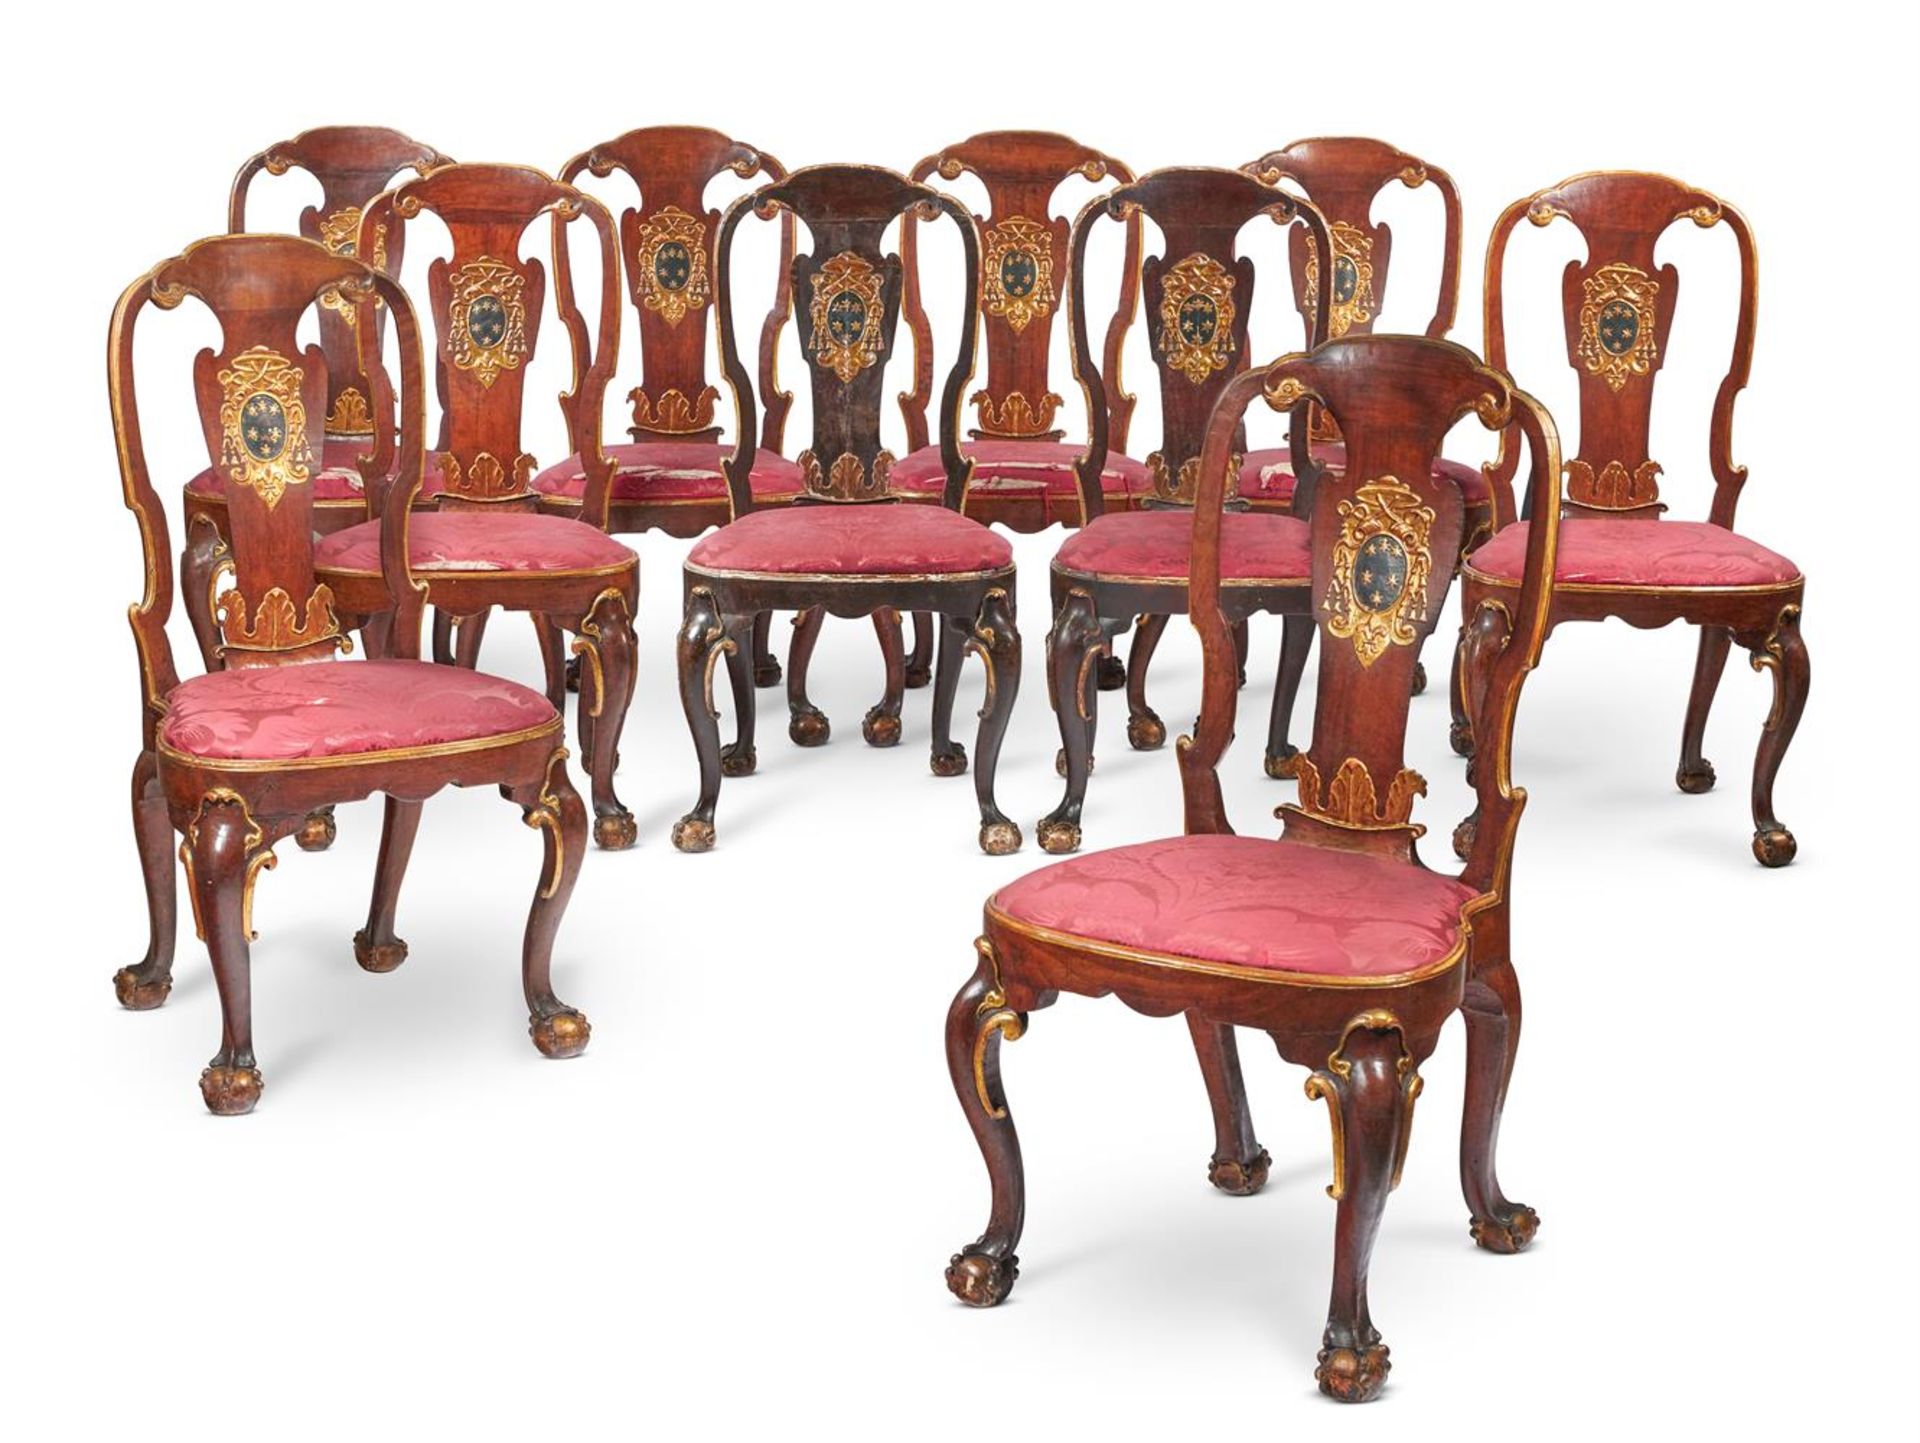 A SET OF EIGHT GEORGE II WALNUT AND PARCEL GILT DINING CHAIRSCIRCA 1730With repeating eagle motifs - Image 2 of 7